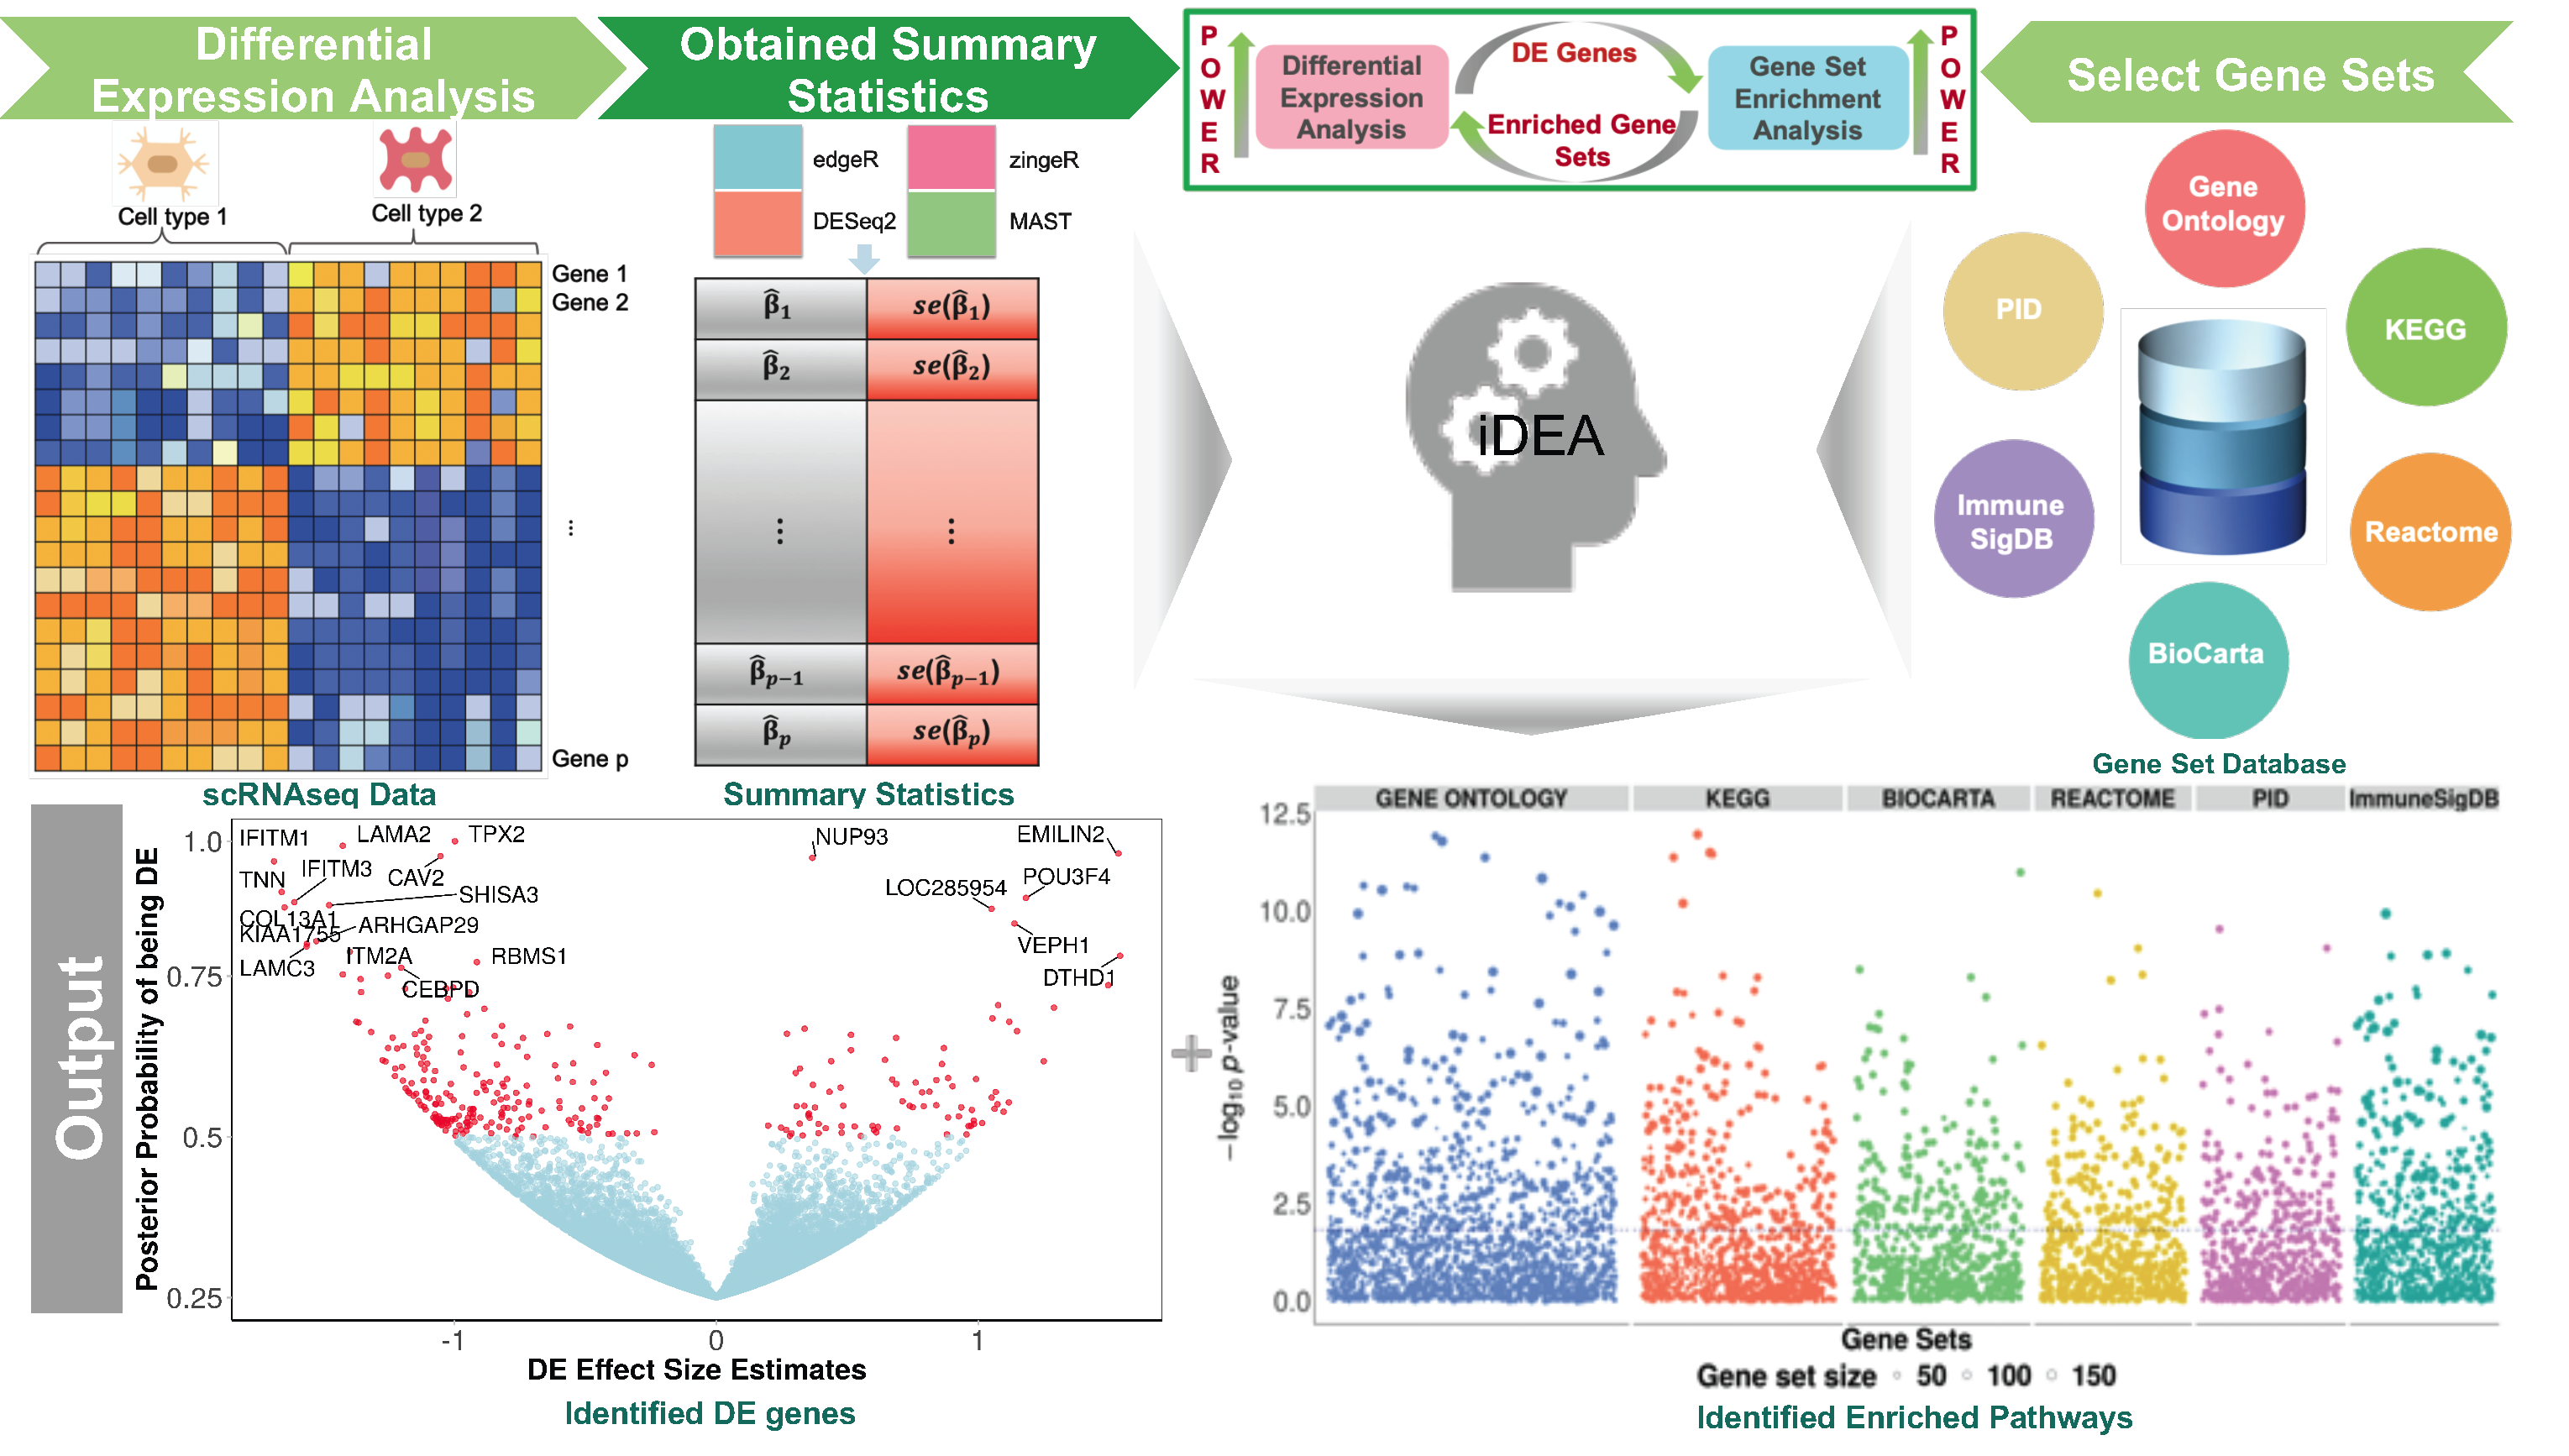 Integrative differential expression and gene set enrichment analysis using summary statistics for scRNA-seq studies